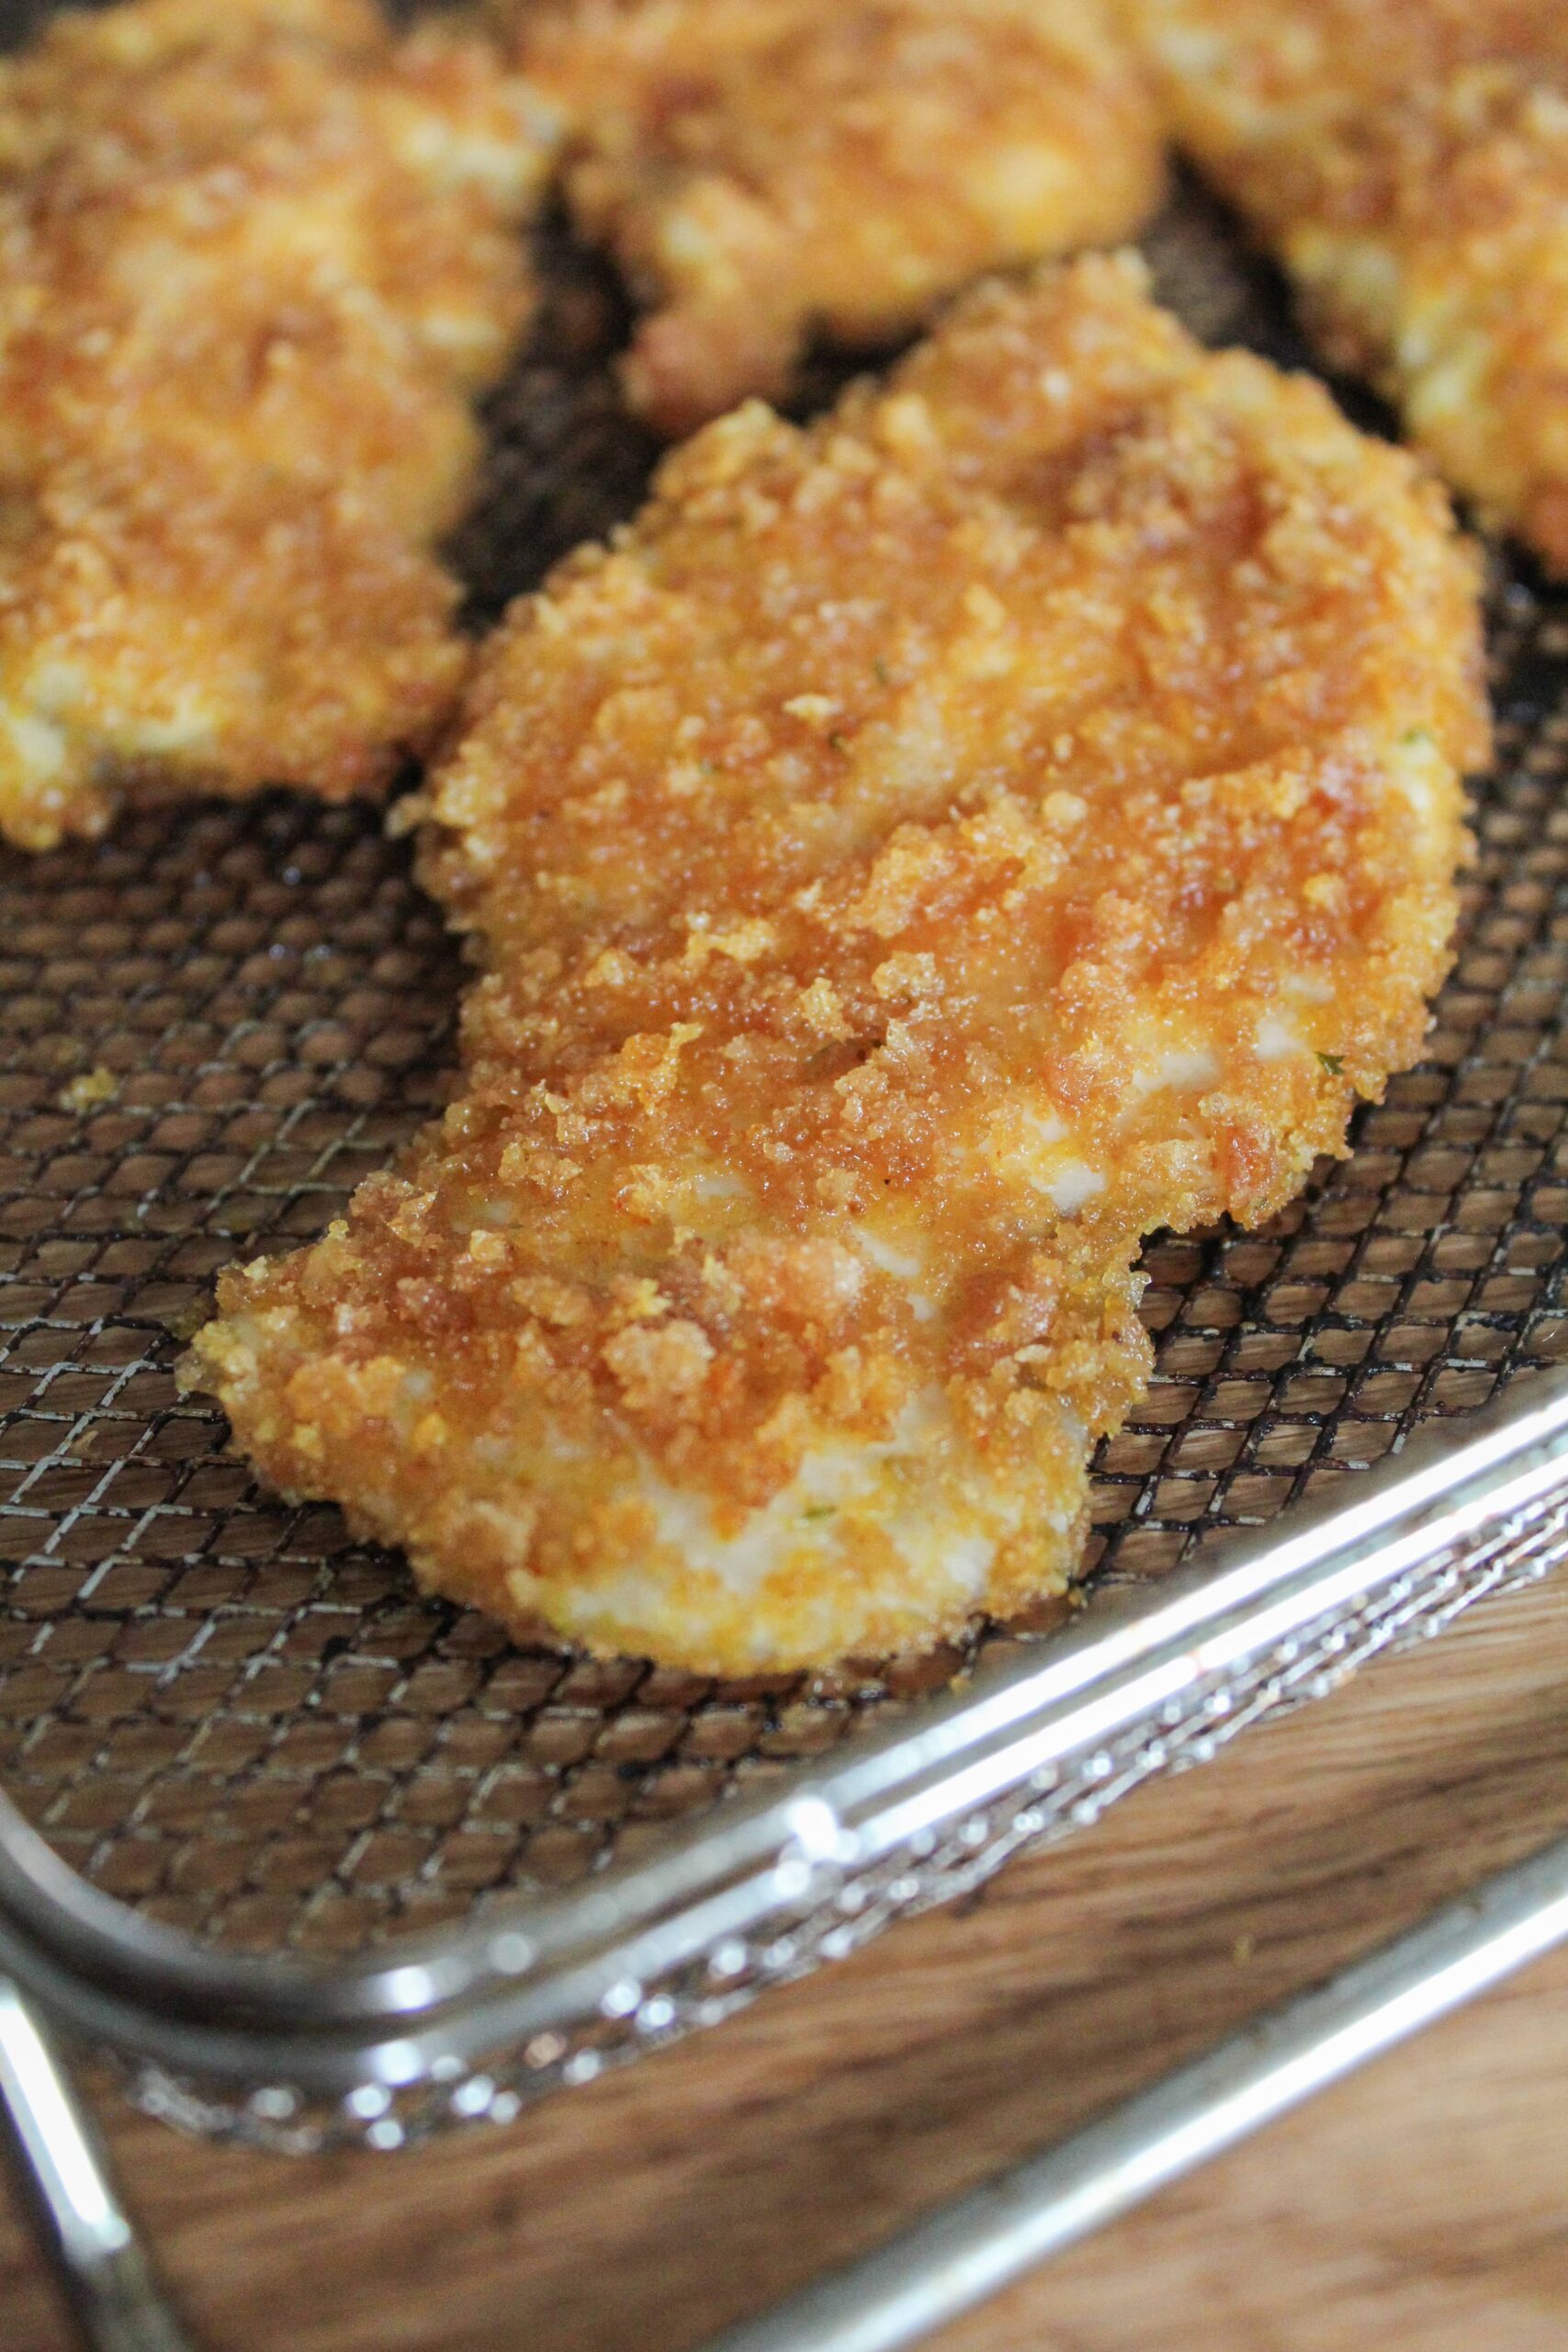 https://fitmomjourney.com/wp-content/uploads/2023/03/Keto-Chicken-Cutlets-Air-Fryer-Recipe-Included-11-min-scaled.jpg